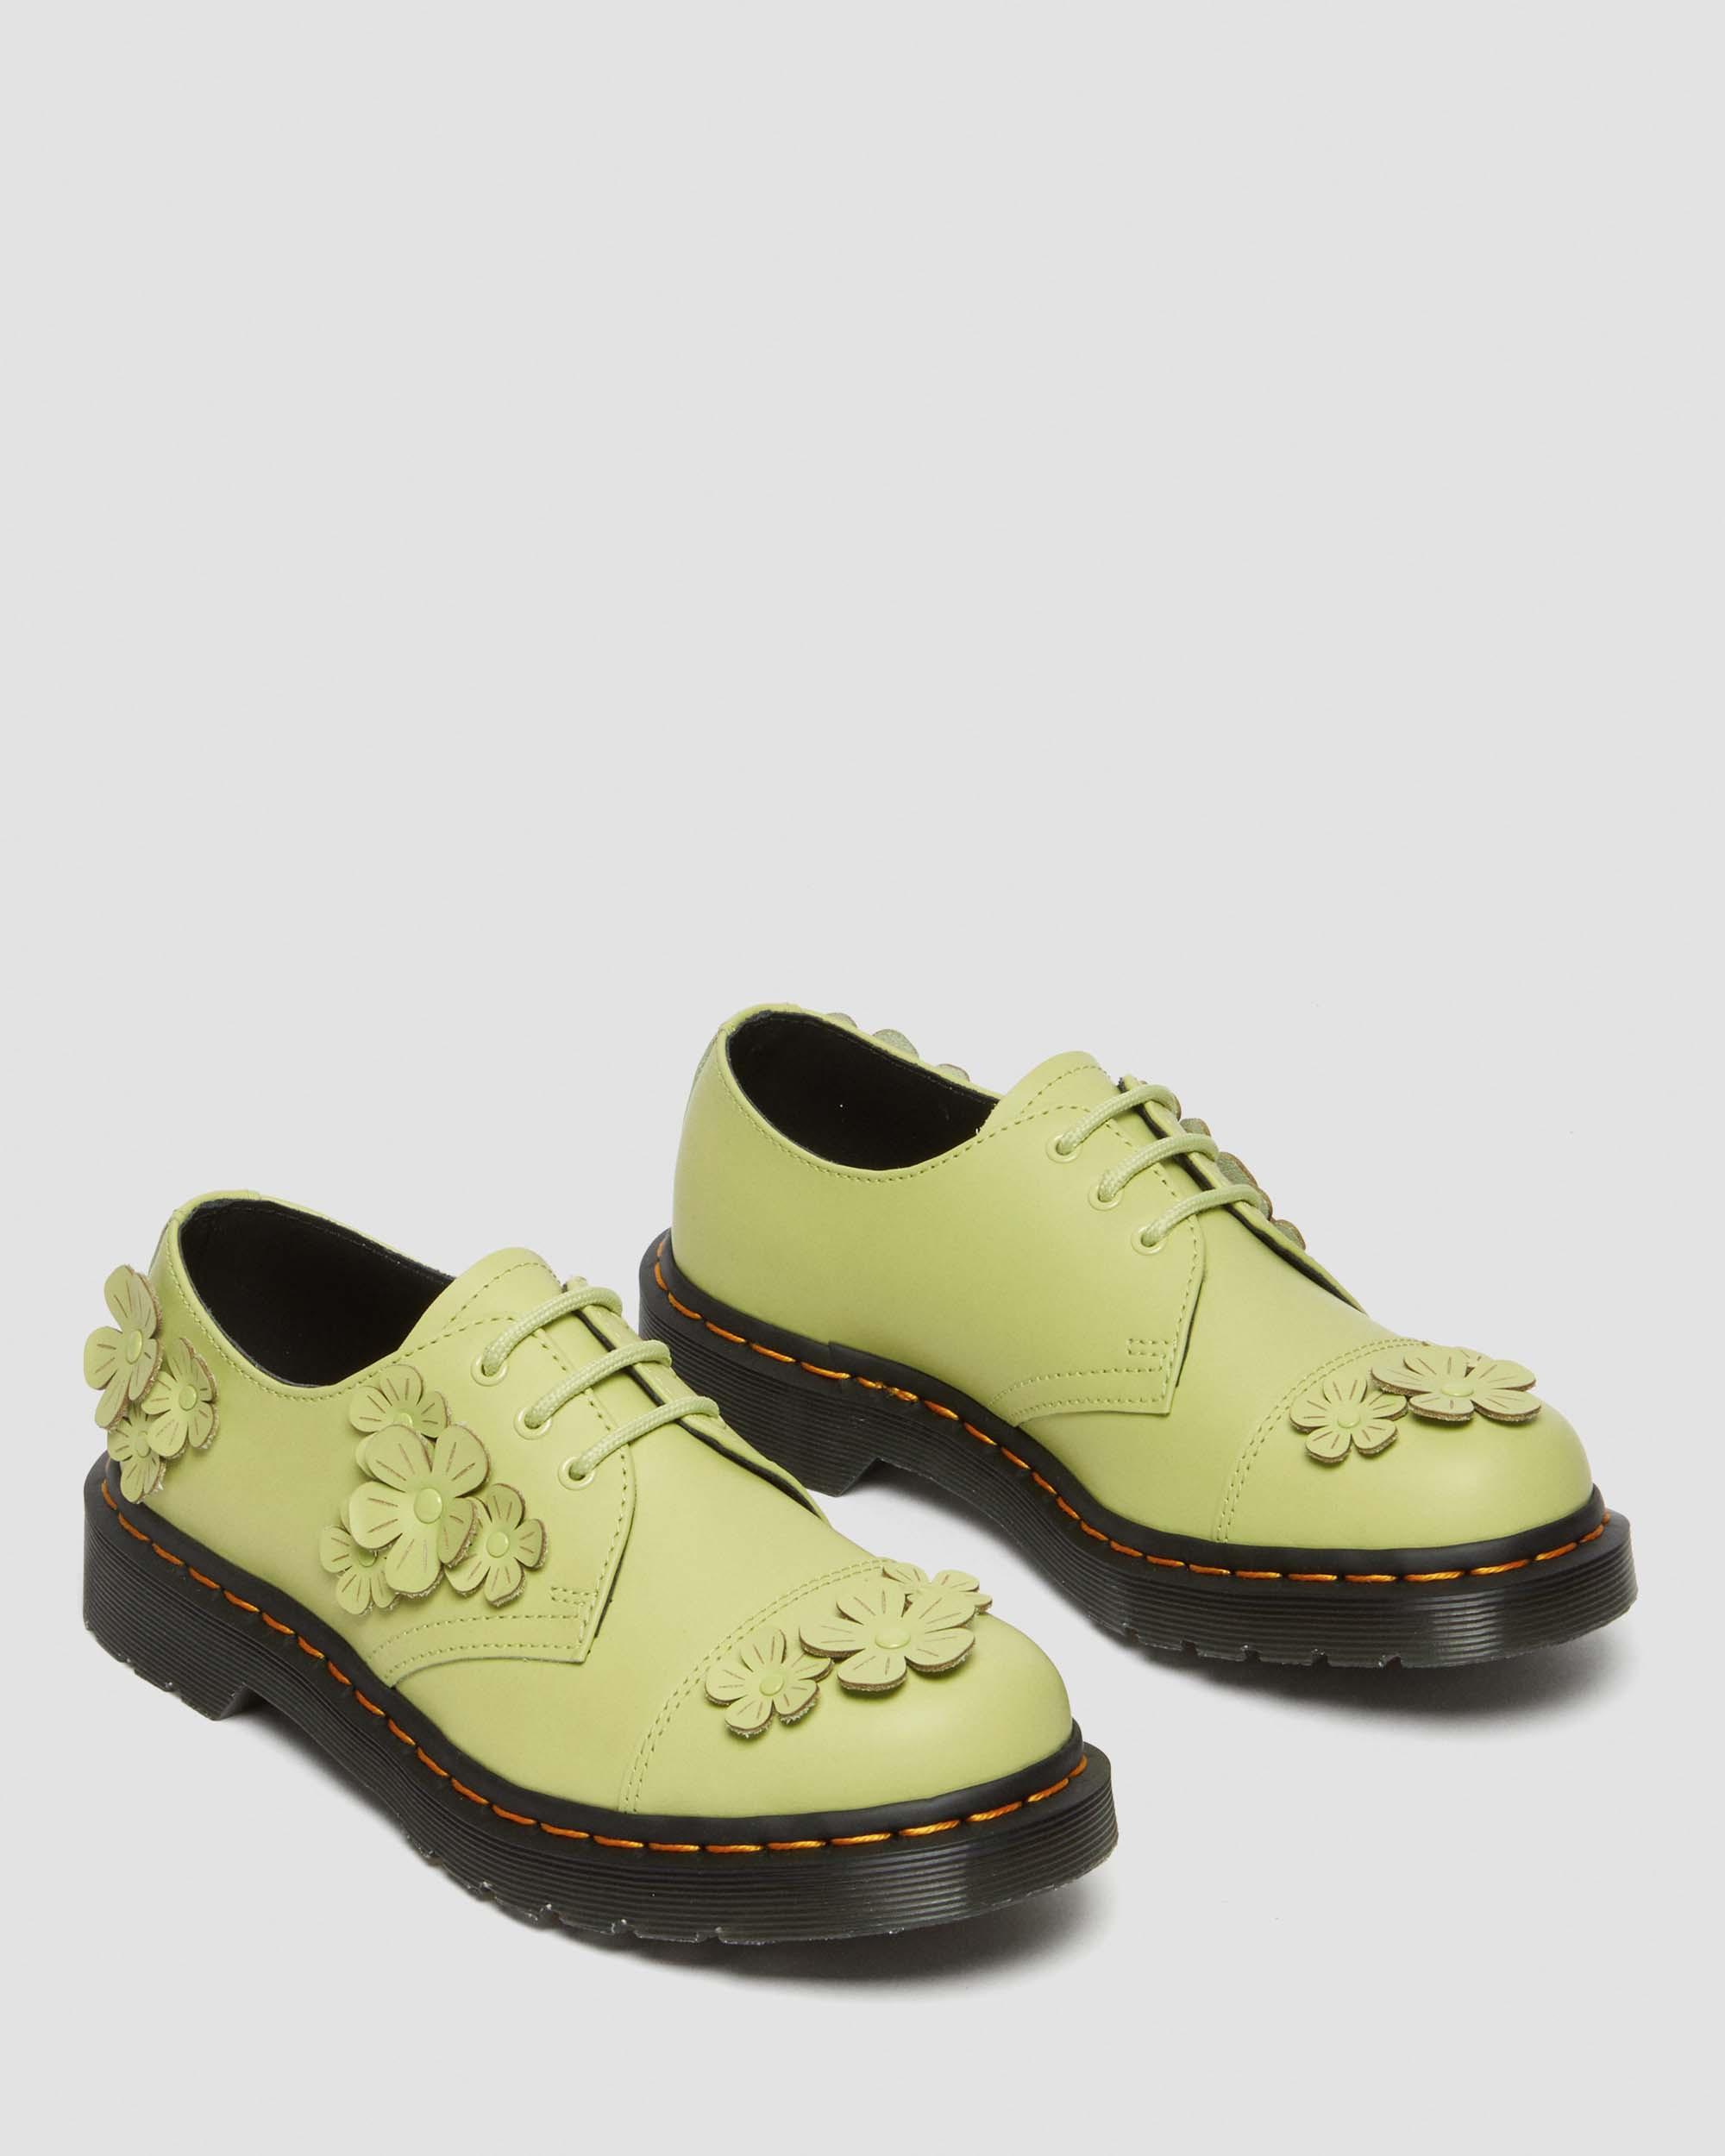 1461 Flower Applique Leather Oxford Shoes in Lime Green